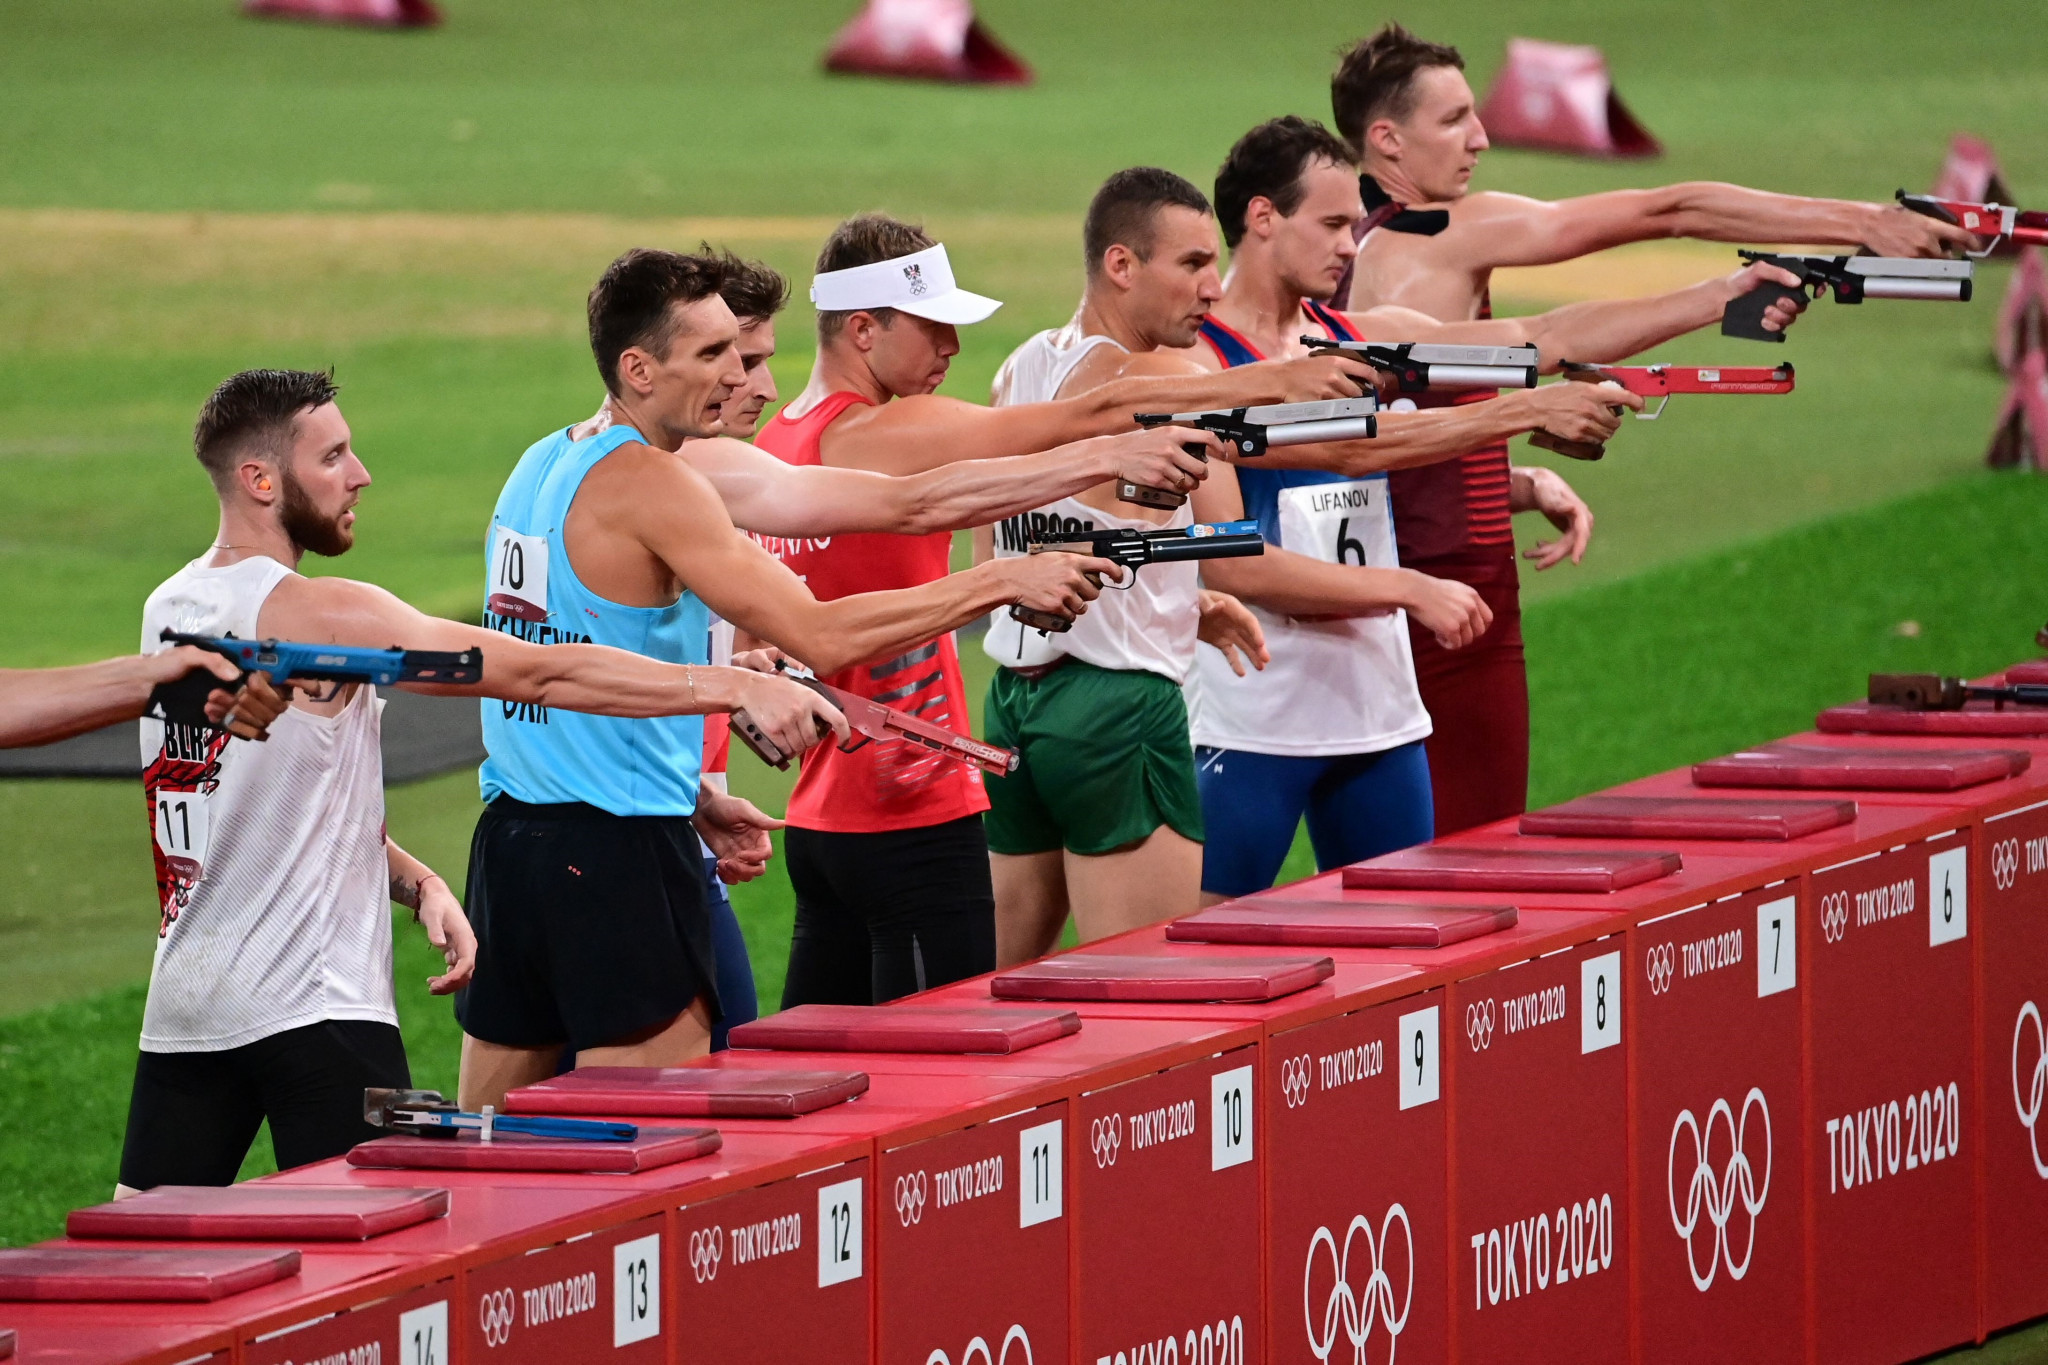 Laser-run - which is the last discipline in modern pentathlon - has been proposed as a standalone event for the Victoria 2026 Commonwealth Games ©Getty Images